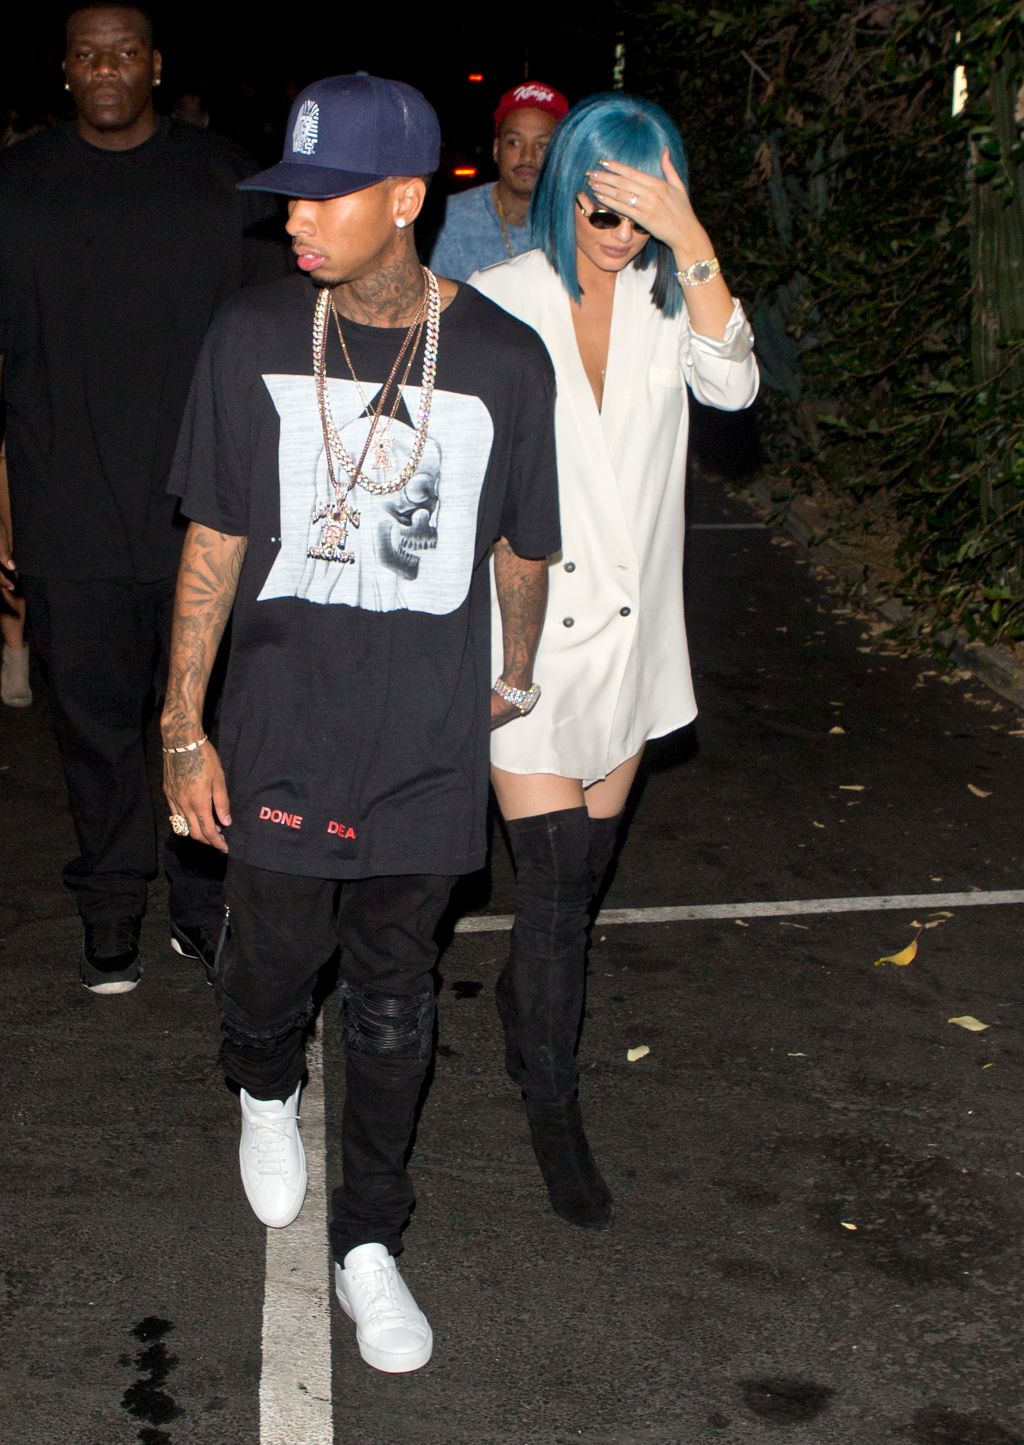 Kylie Jenner and Tyga leave 1 Oak nightclub in West Hollywood, California